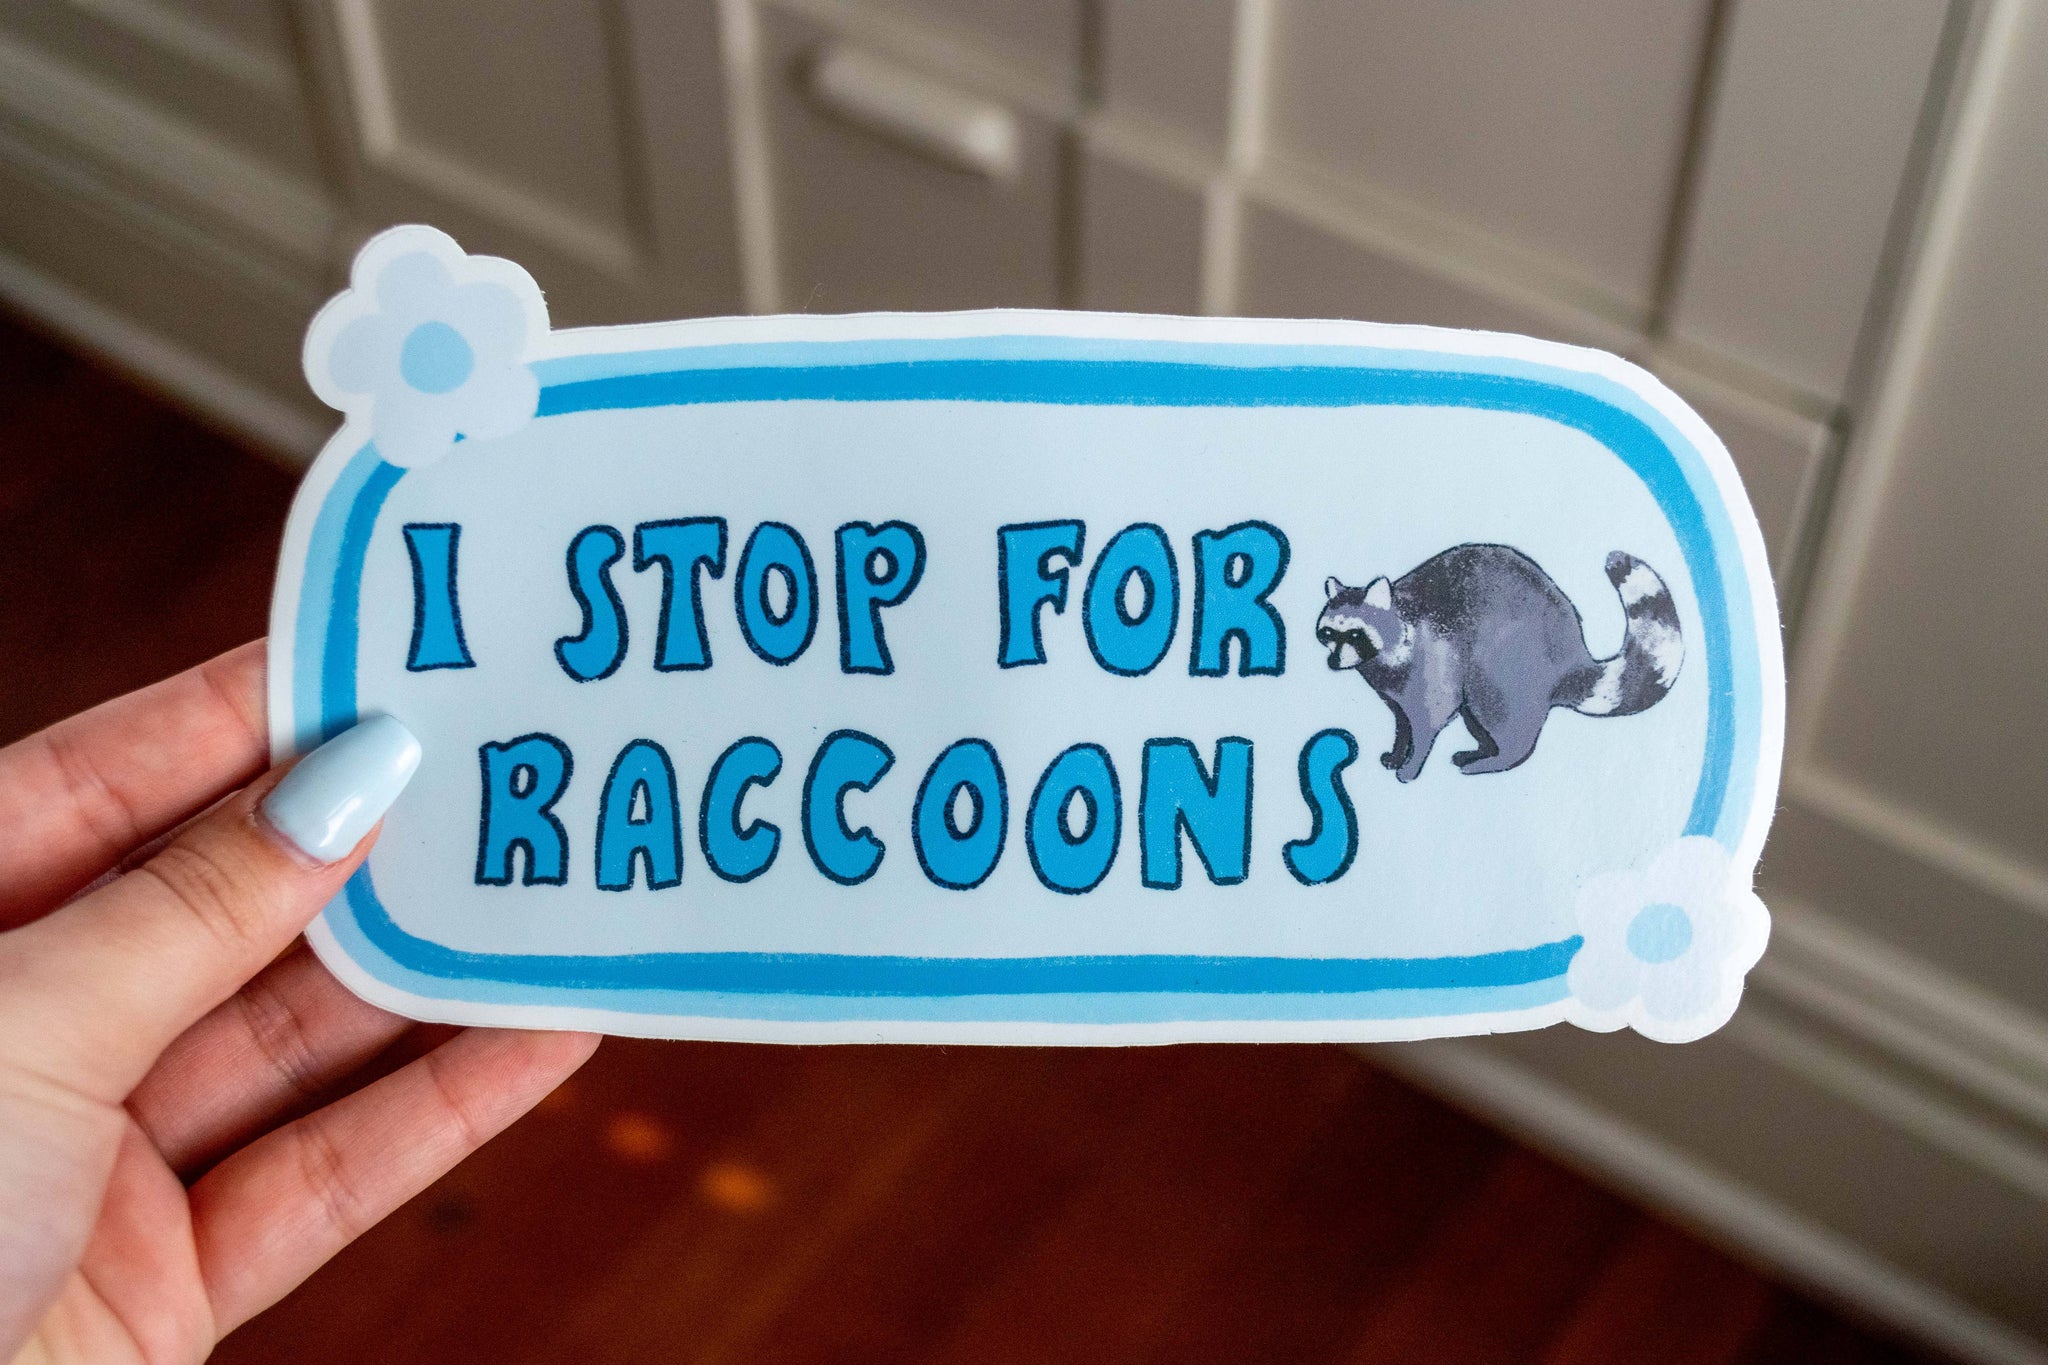 I Stop For Raccoons Bumper Sticker